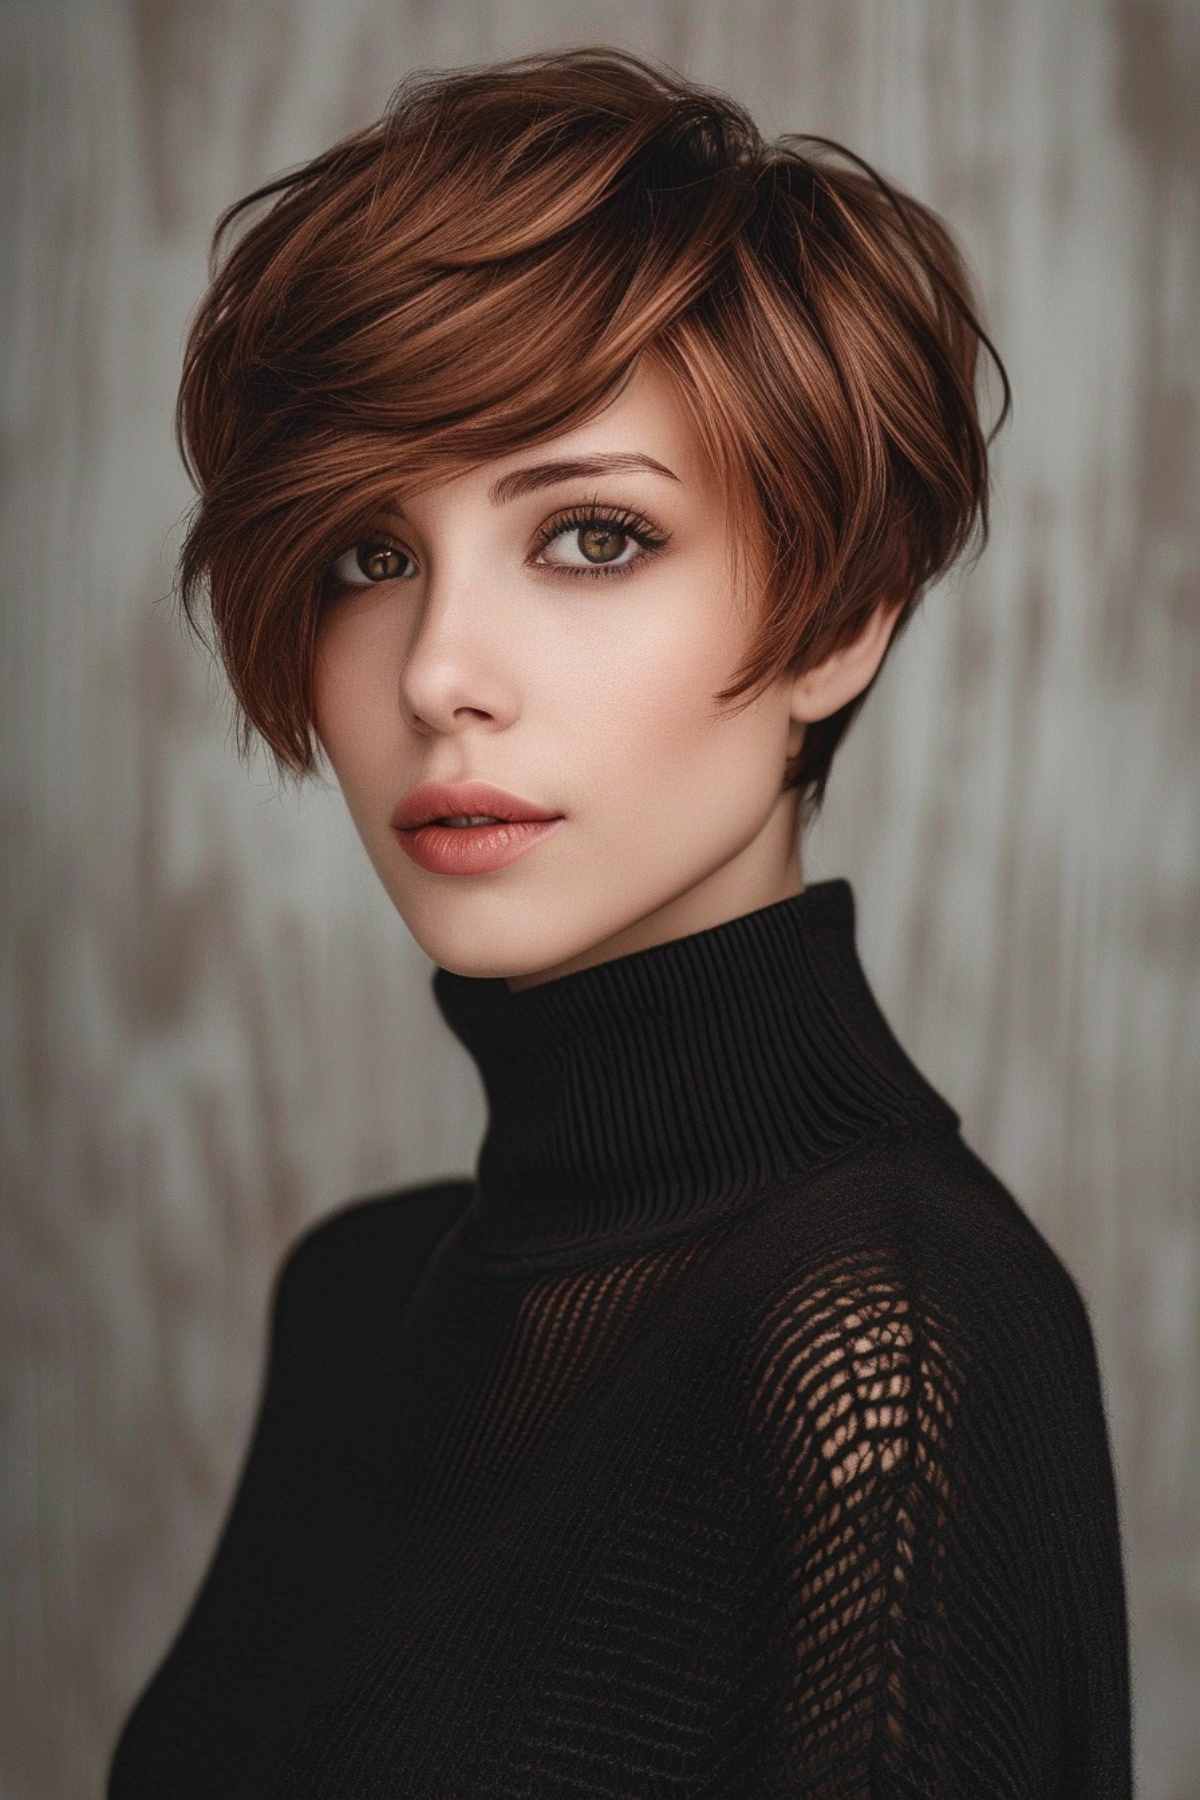 Short Hairstyle with Volume and Fringe for Long Faces